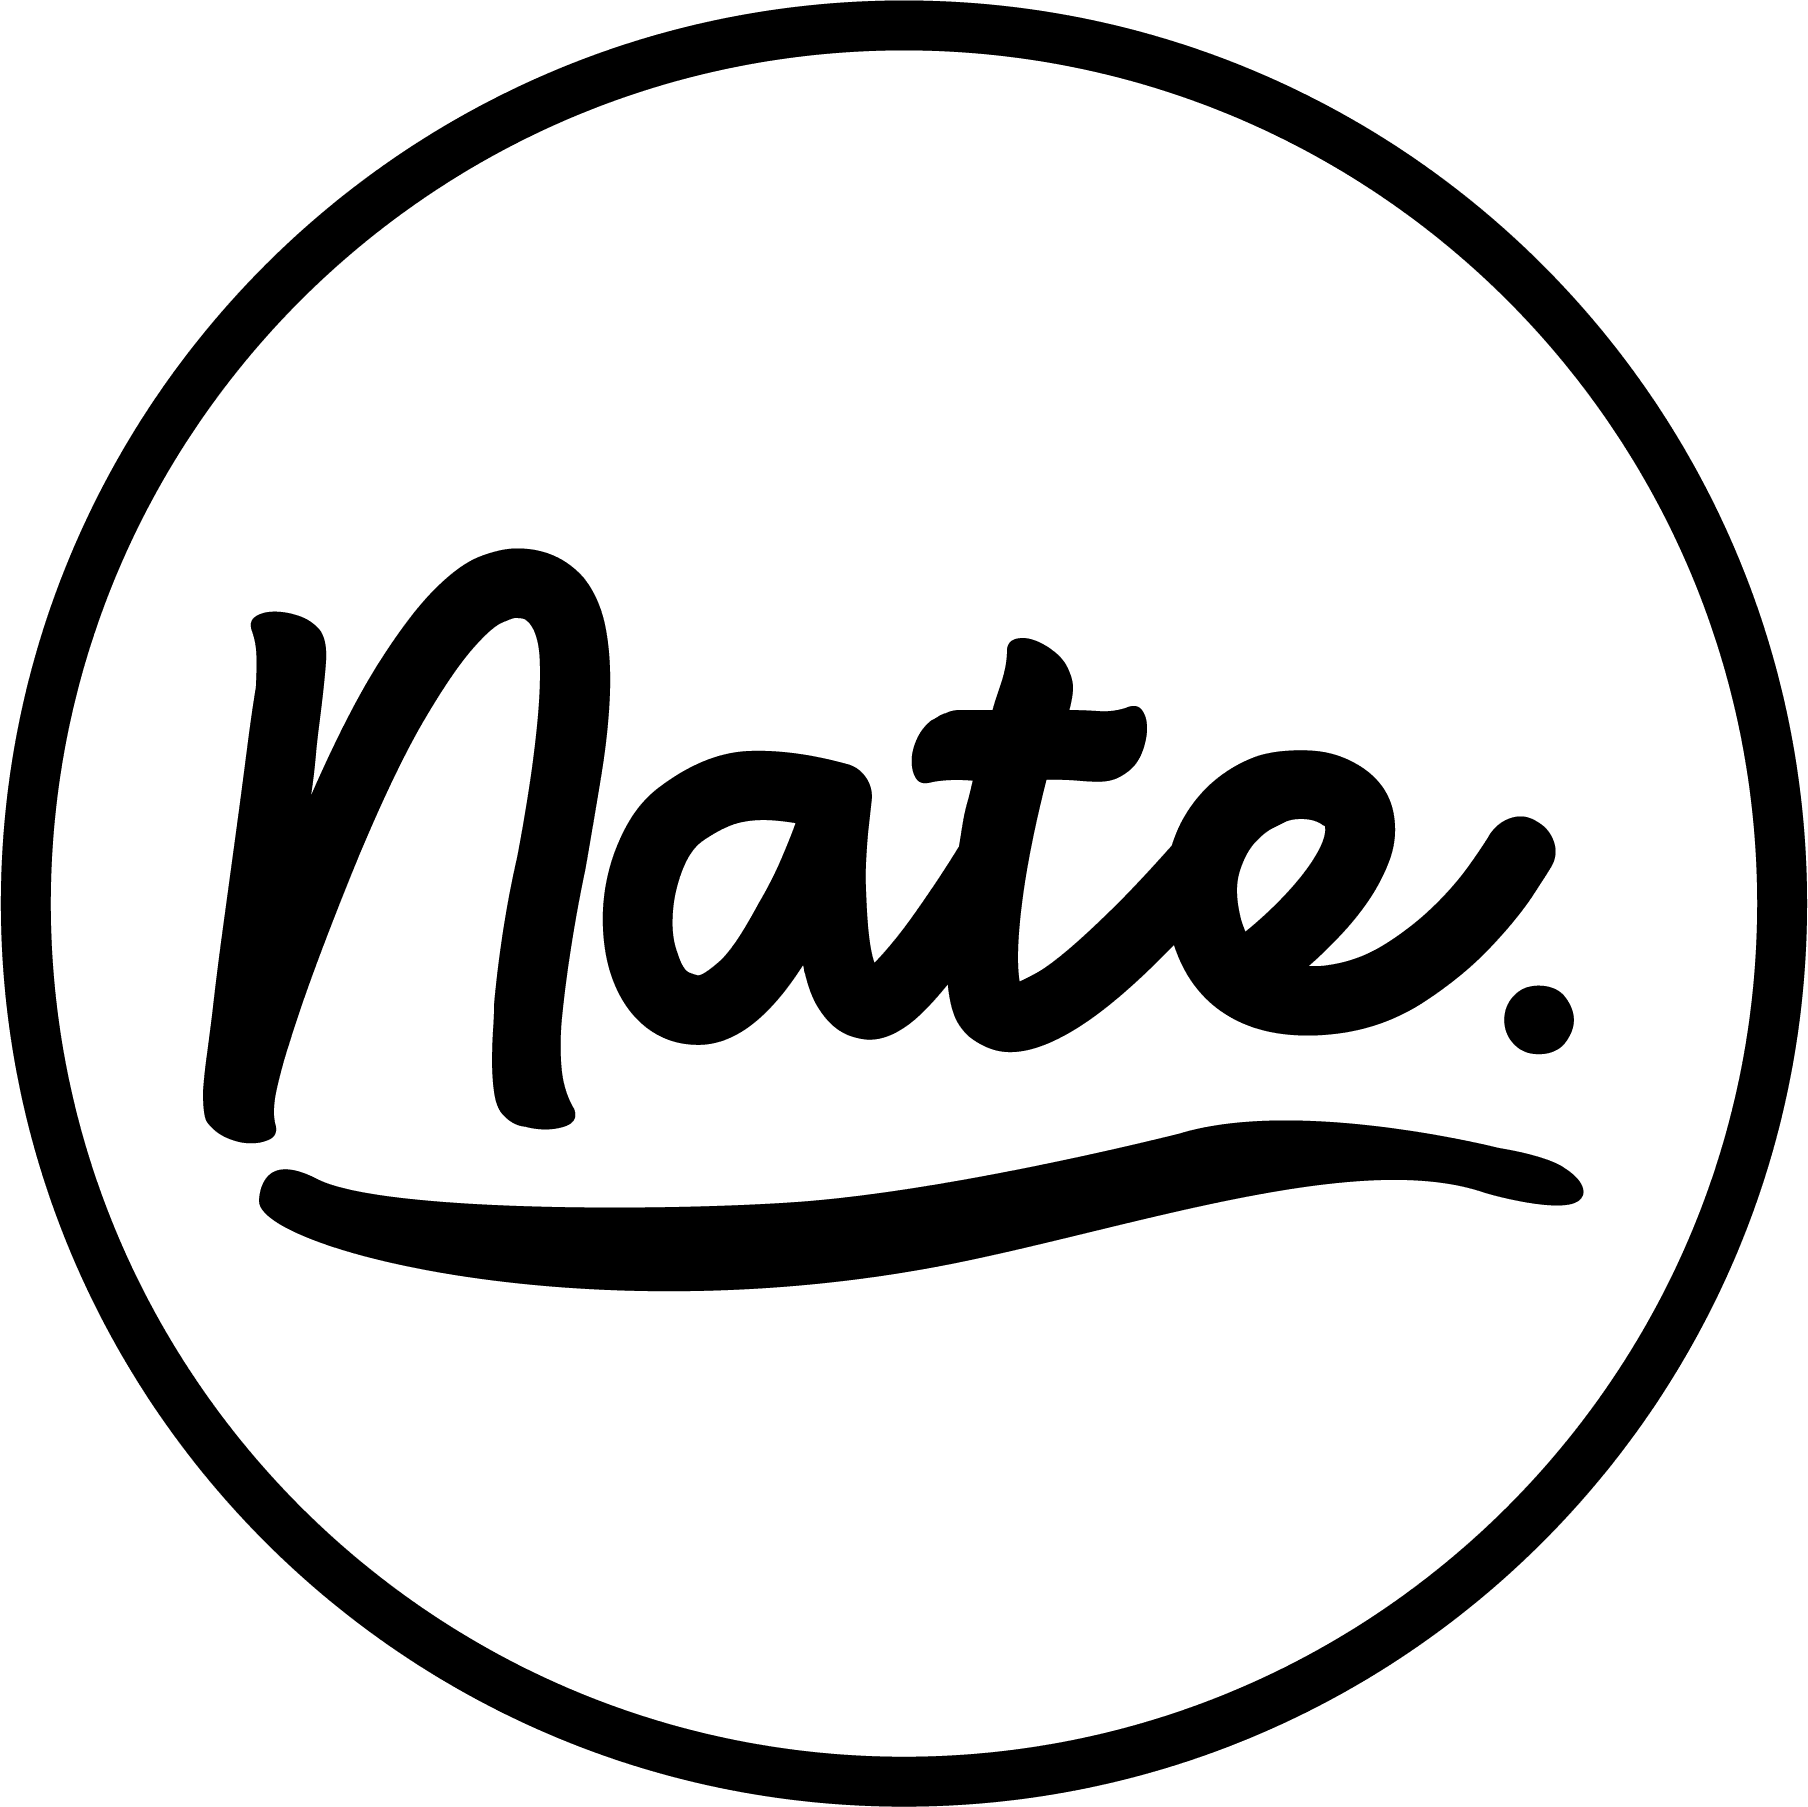 Nate Logo - Commercial Photographer in Sheffield - Events, Corporate, PR & More